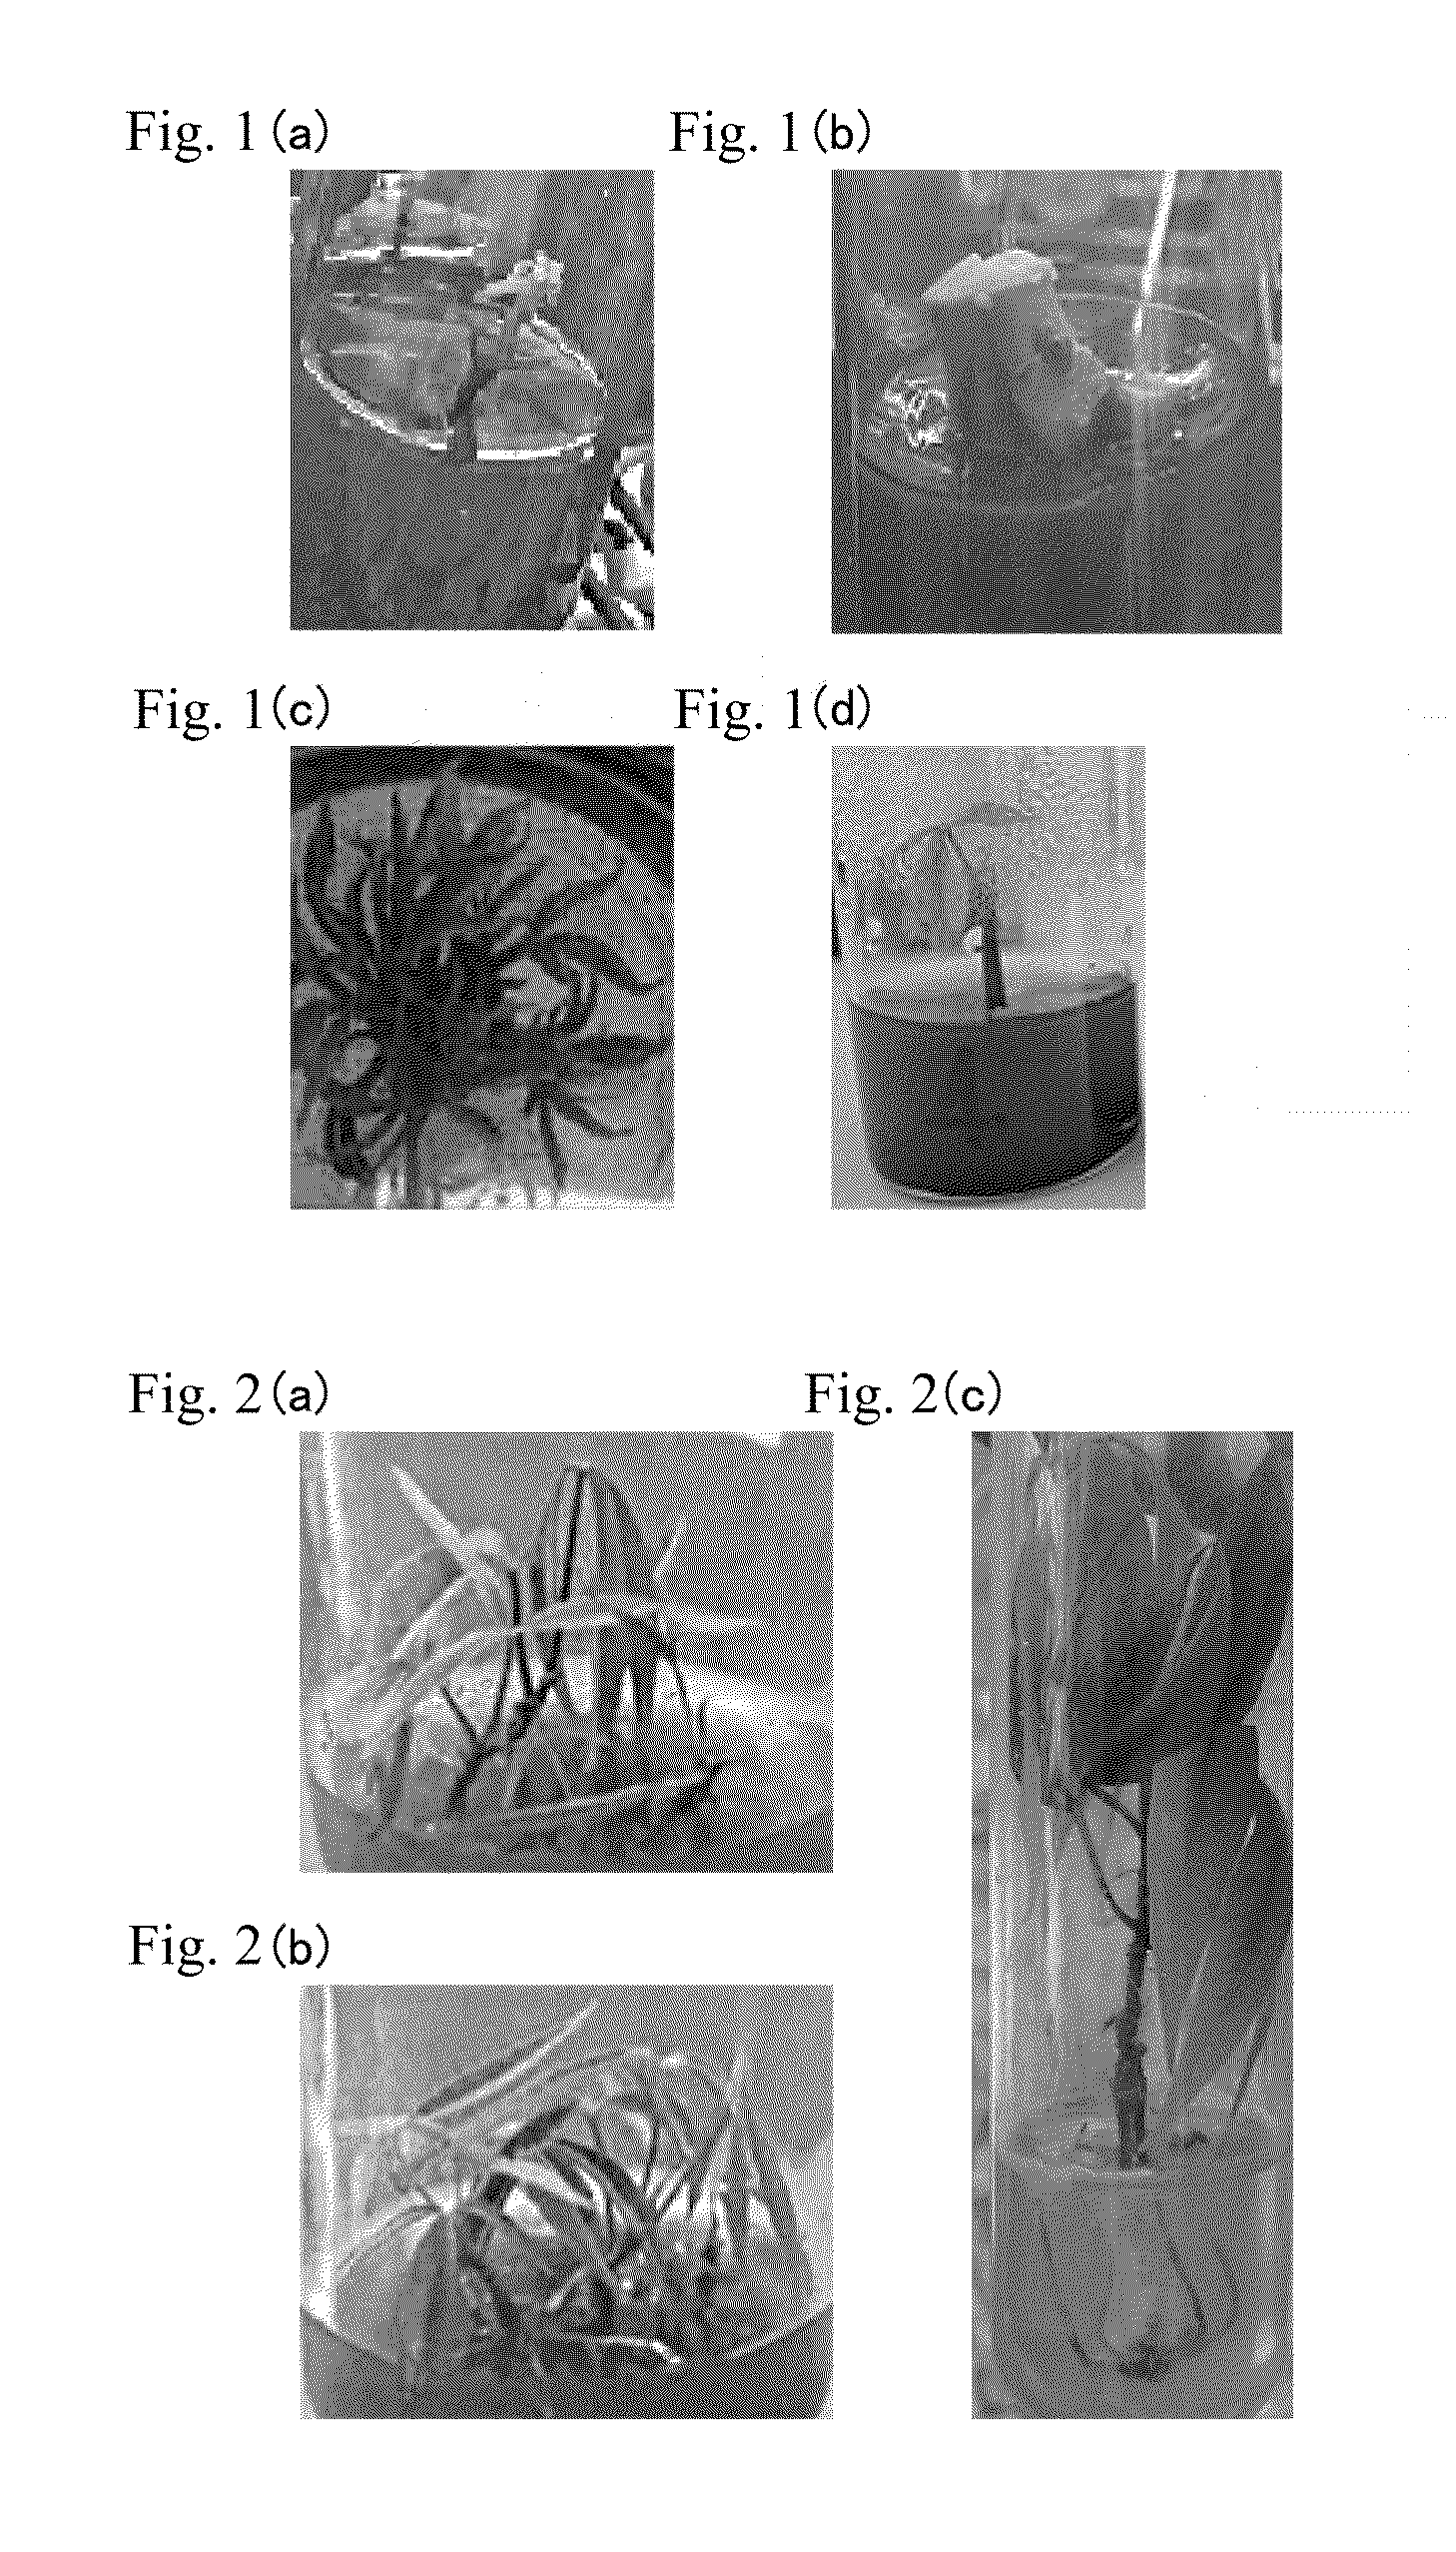 Method of regenerating rubber tree, method of propagating rubber tree, method of inducing shoot, method of elongating shoot, method of rooting shoot, and method of acclimatizing young plant